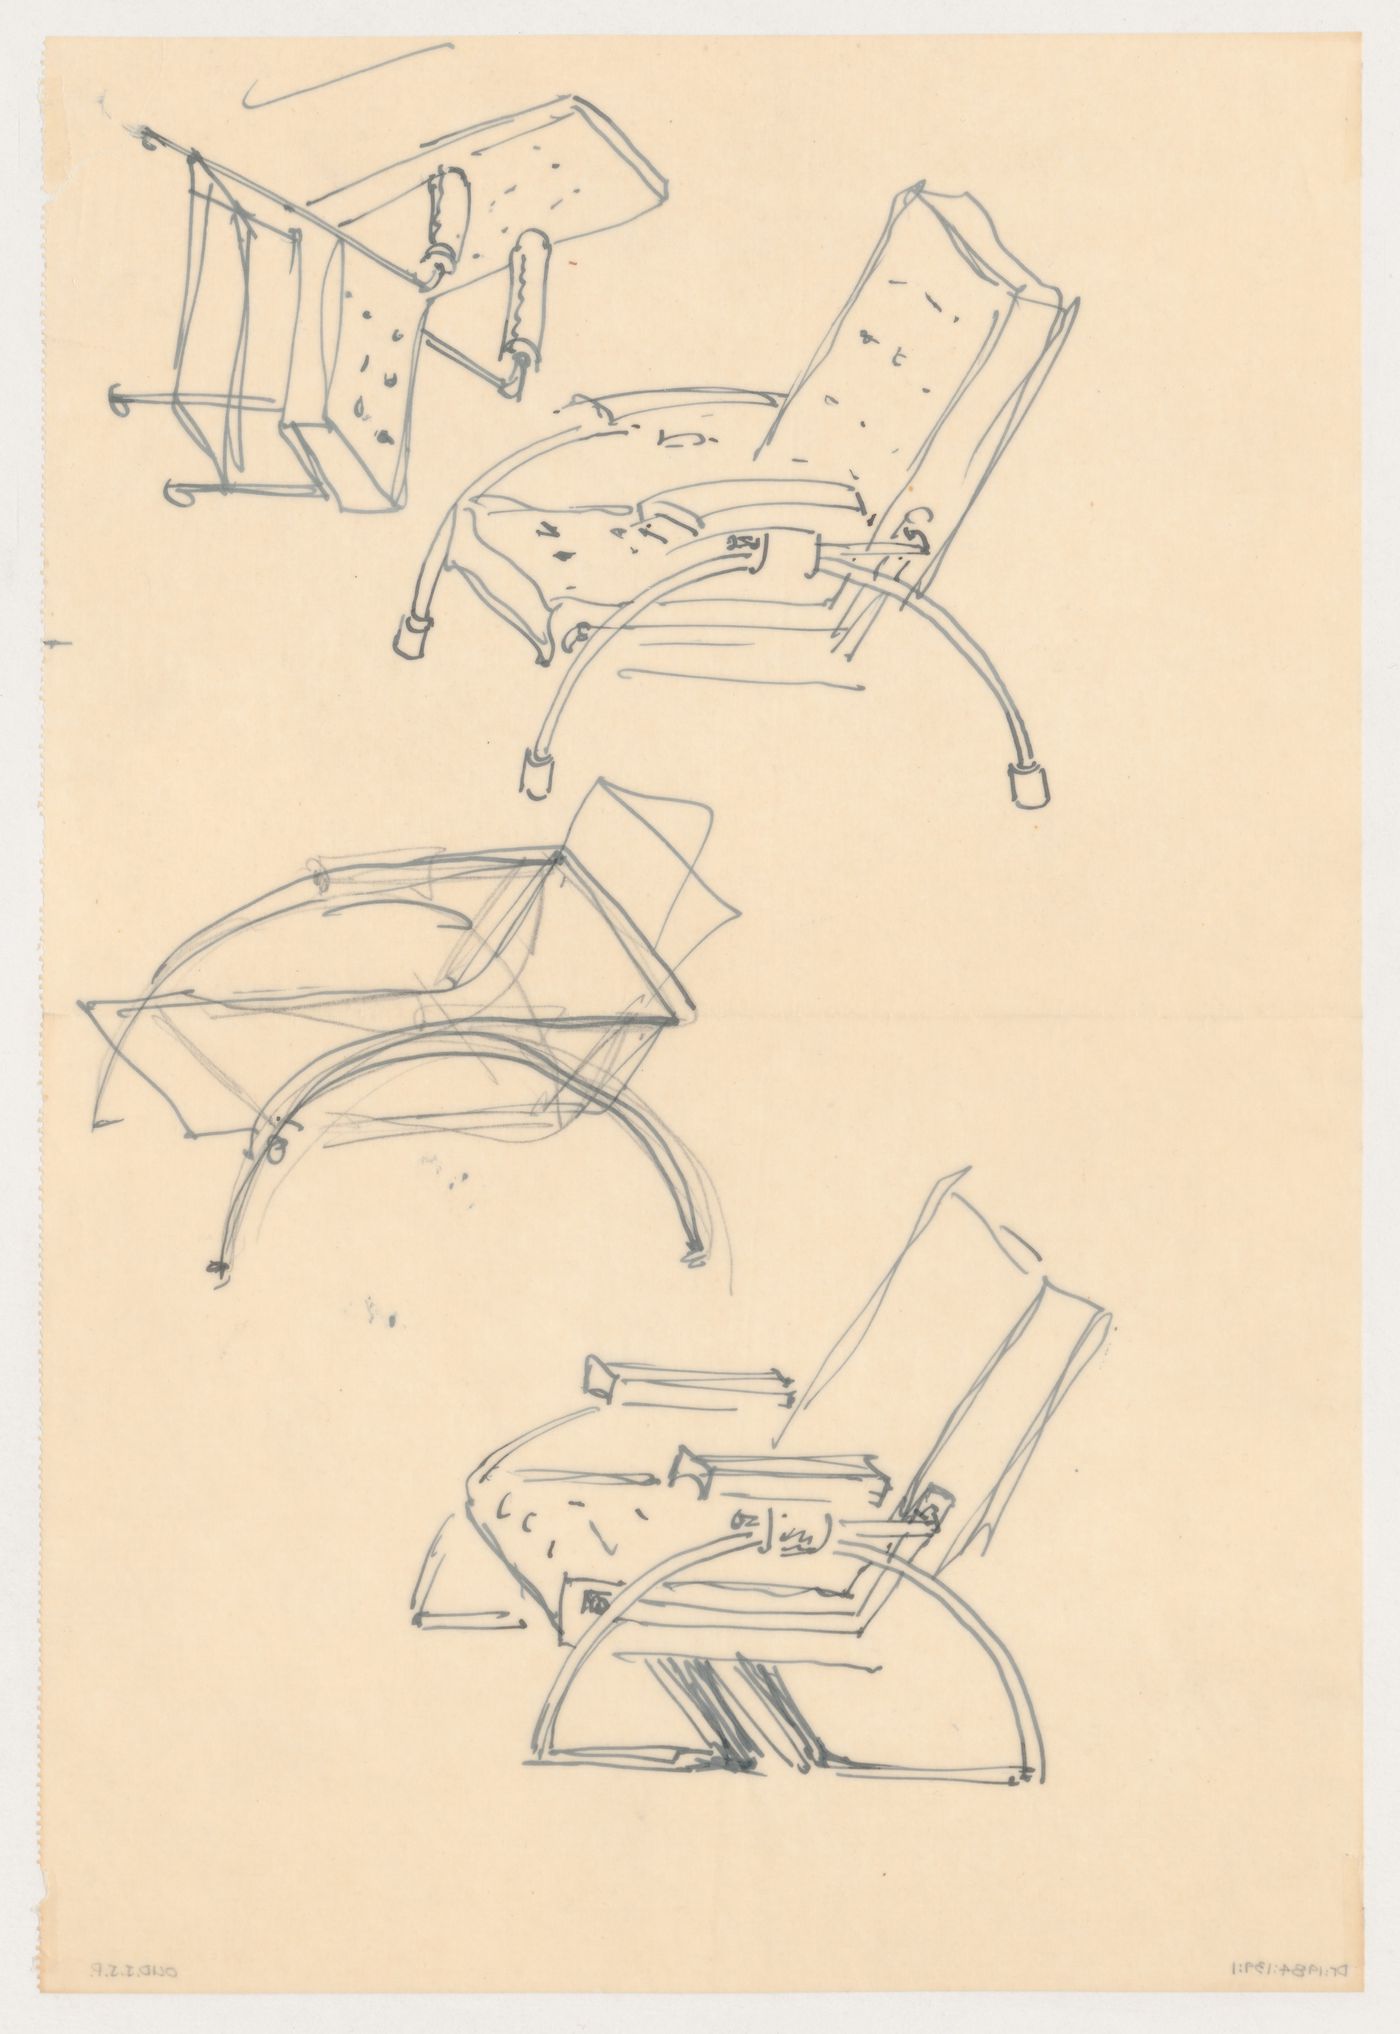 Sketch perspectives for chairs, possibly for Metz & Co., Amsterdam, Netherlands